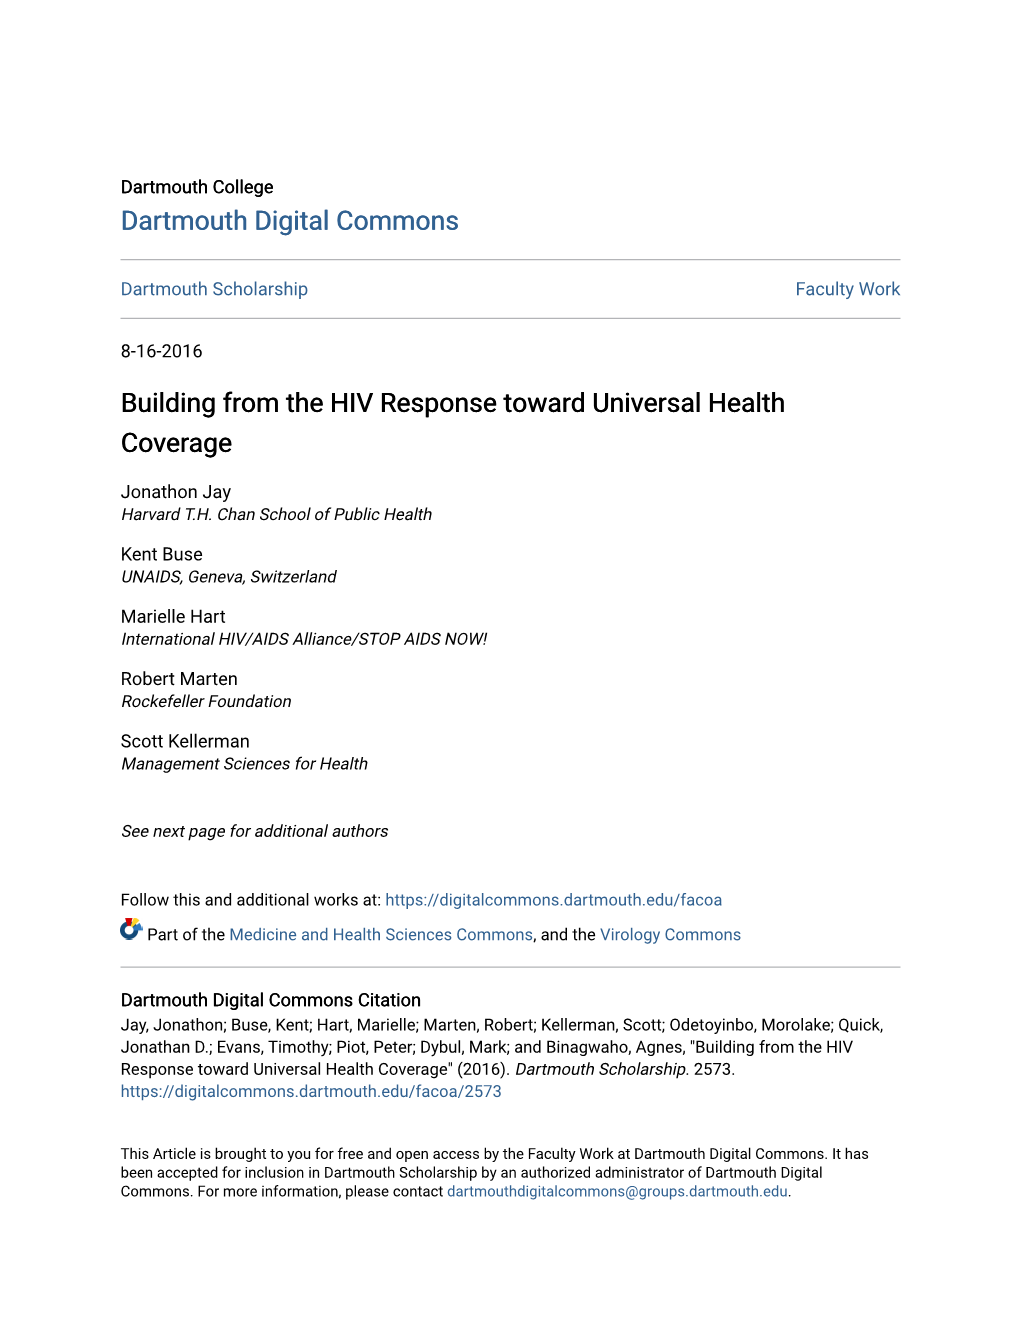 Building from the HIV Response Toward Universal Health Coverage